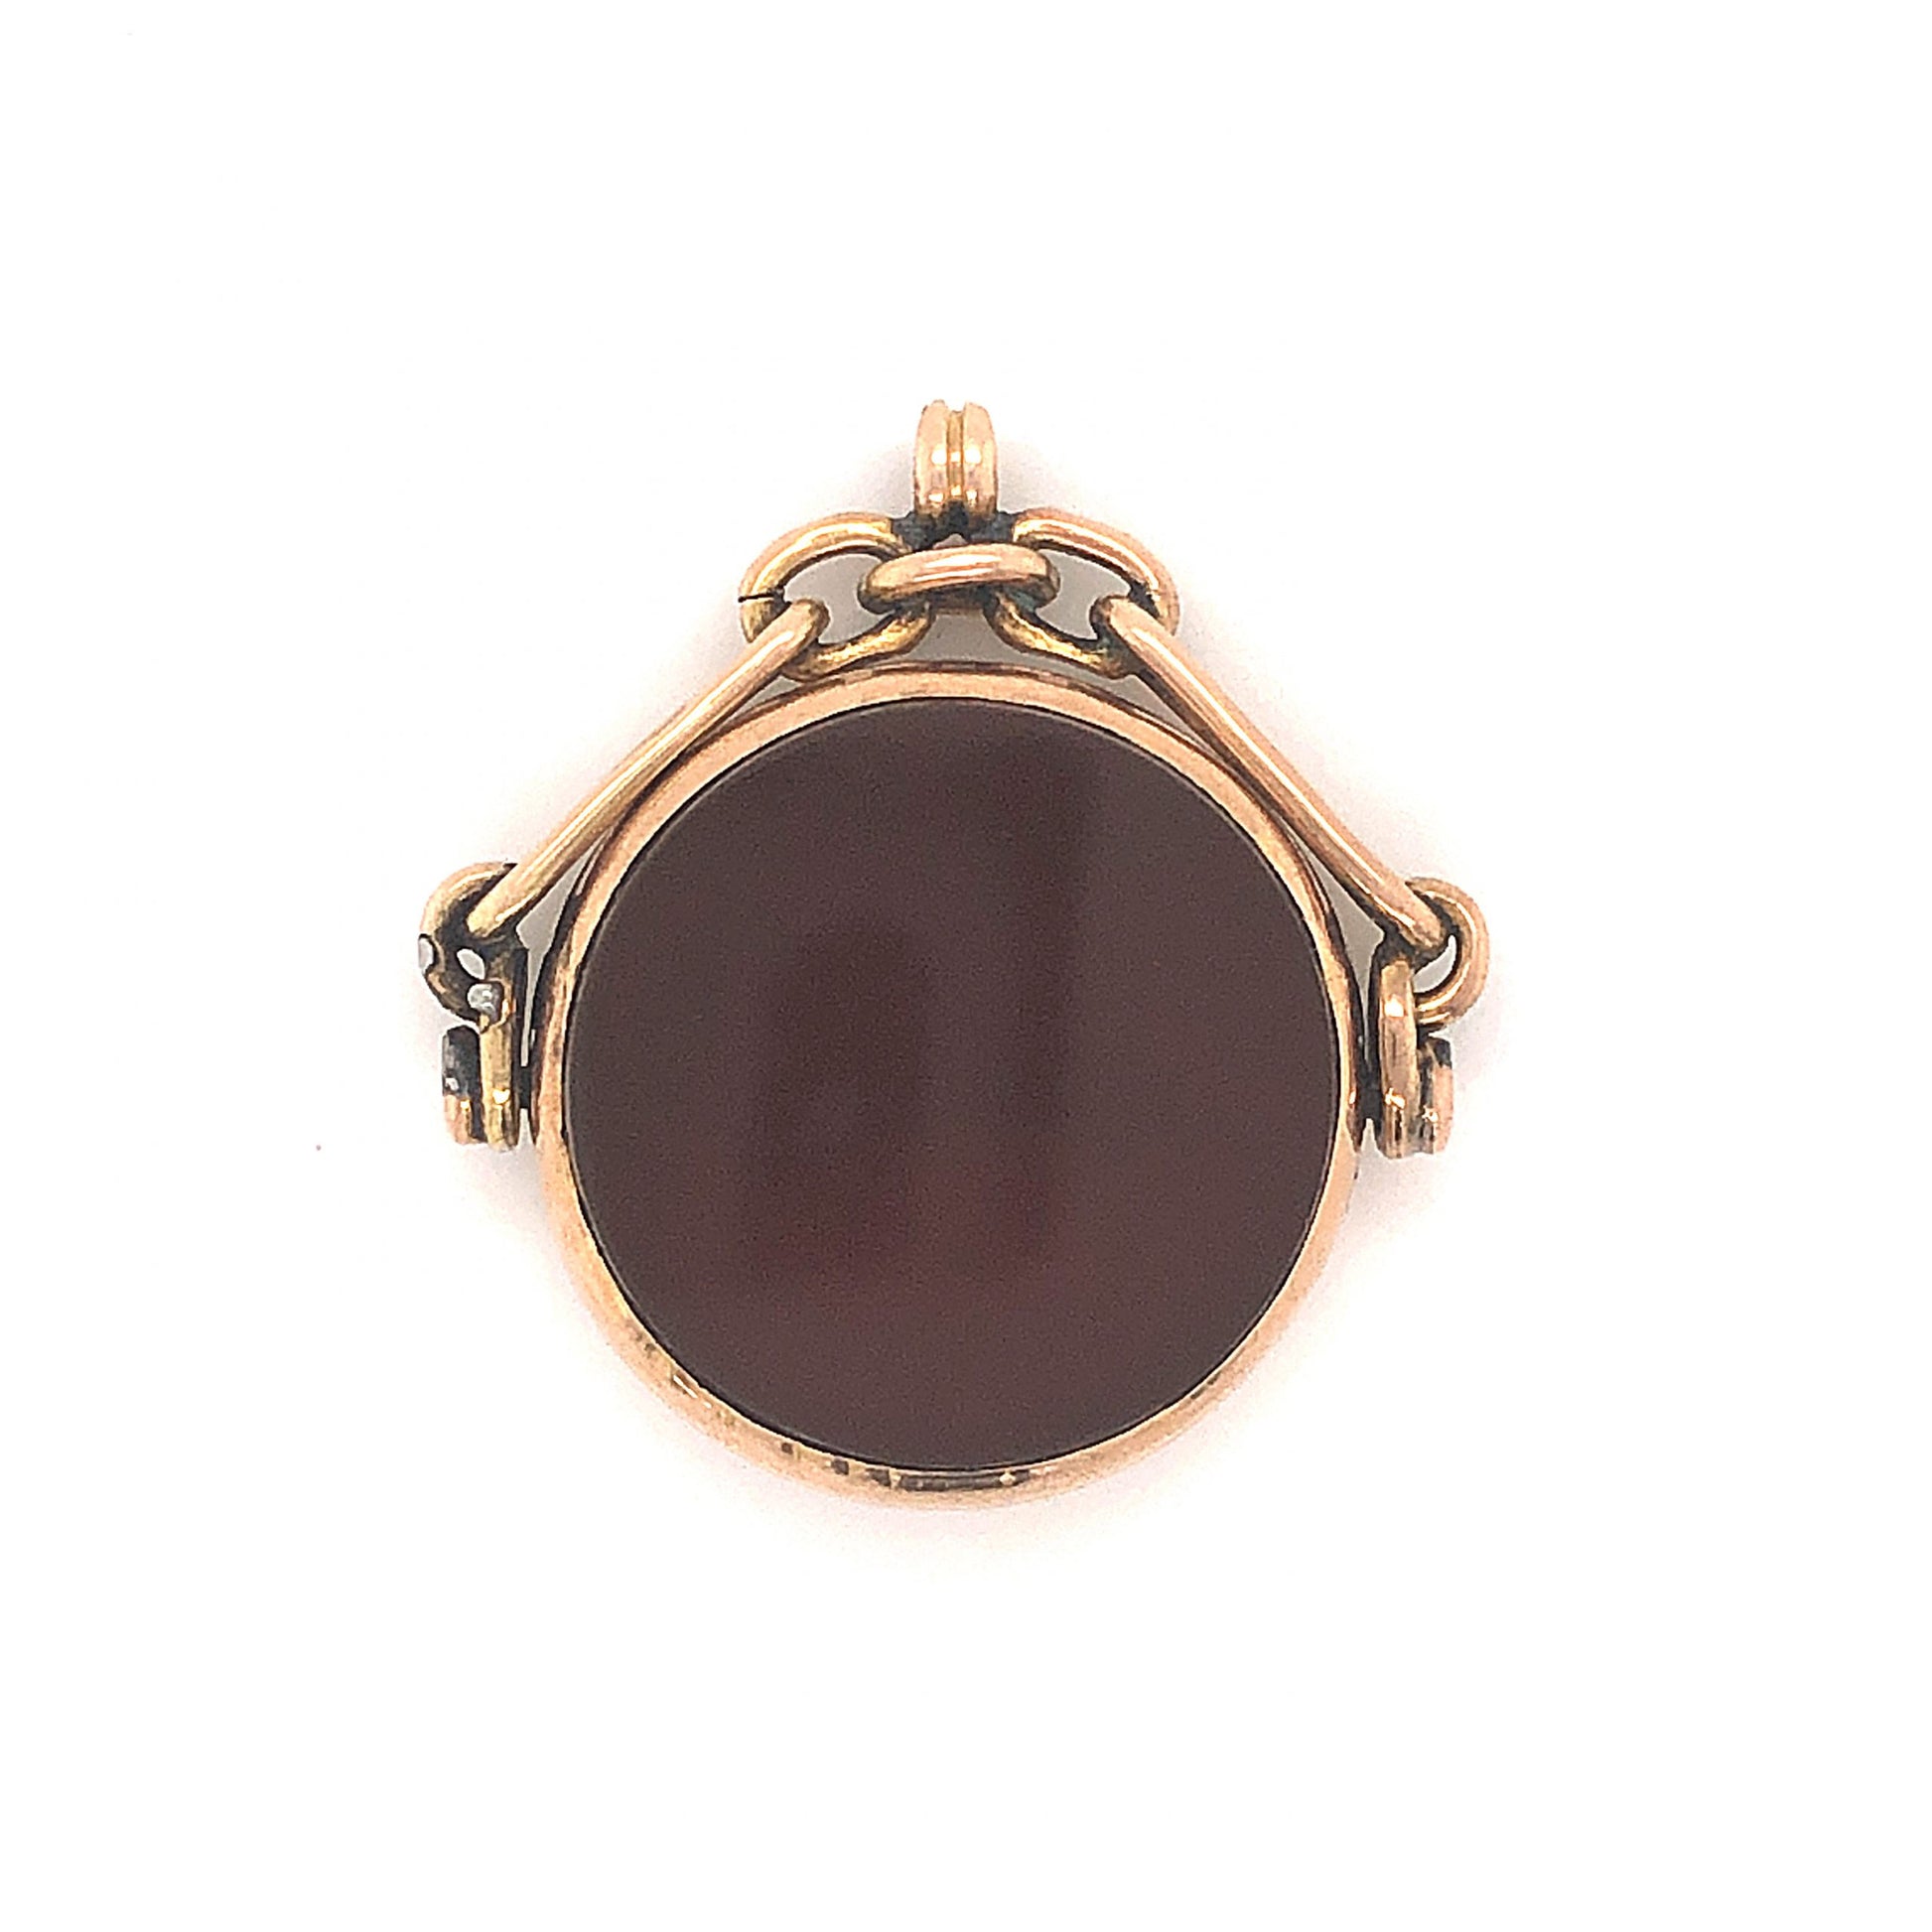 Antique Victorian Spinning Bloodstone Pendant in 14k Yellow GoldComposition: 14 Karat Yellow GoldTotal Gram Weight: 8.2 g